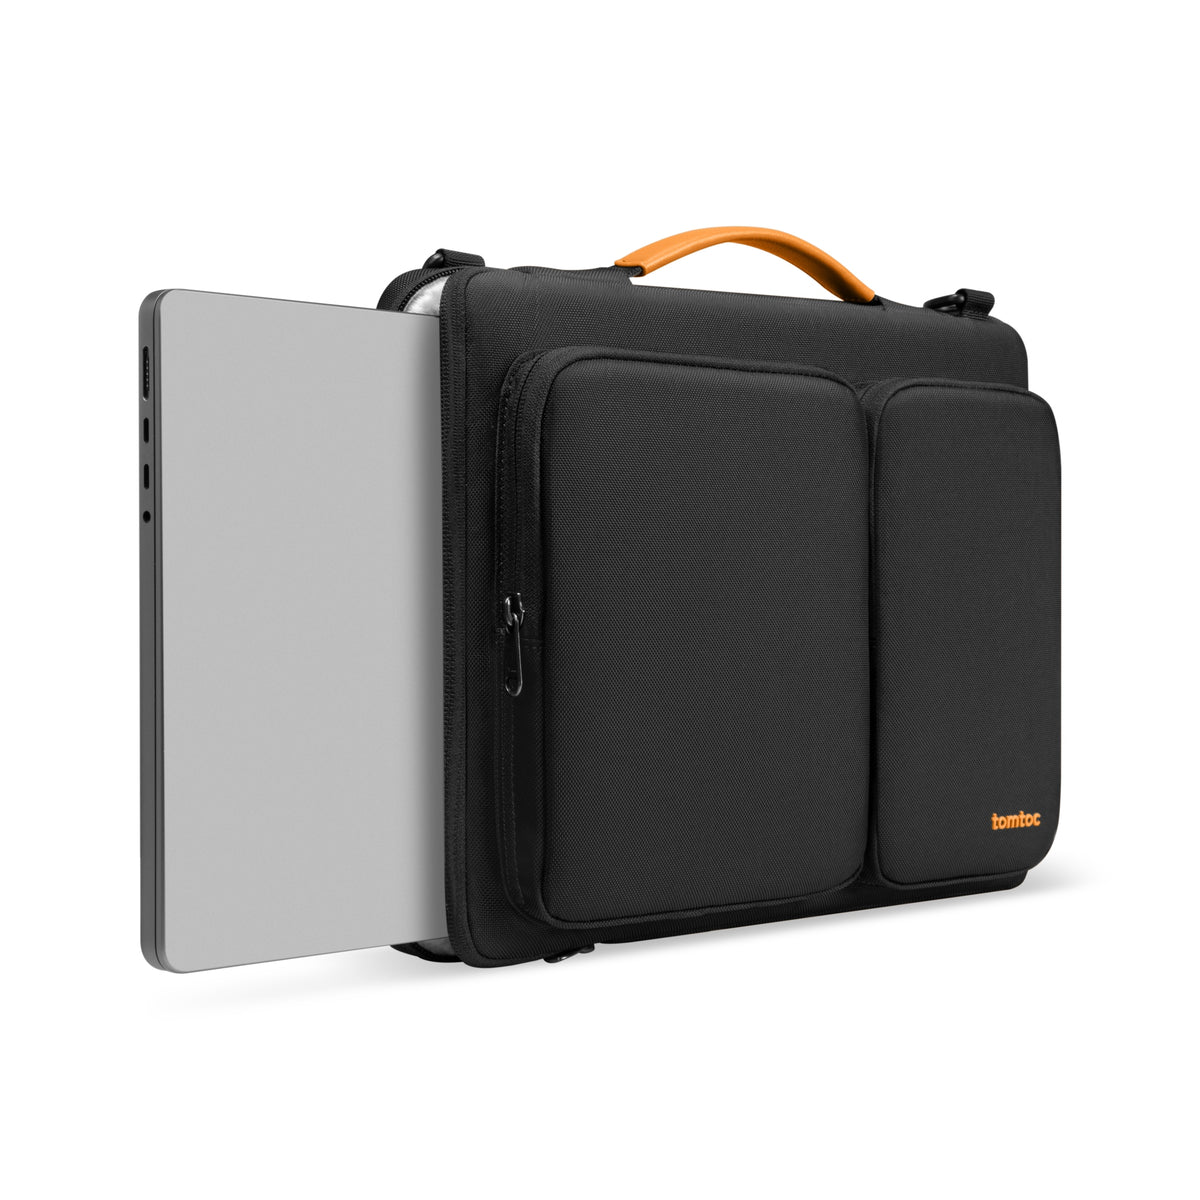 secondary_Defender-A42 Laptop Briefcase For 14-inch MacBook Pro